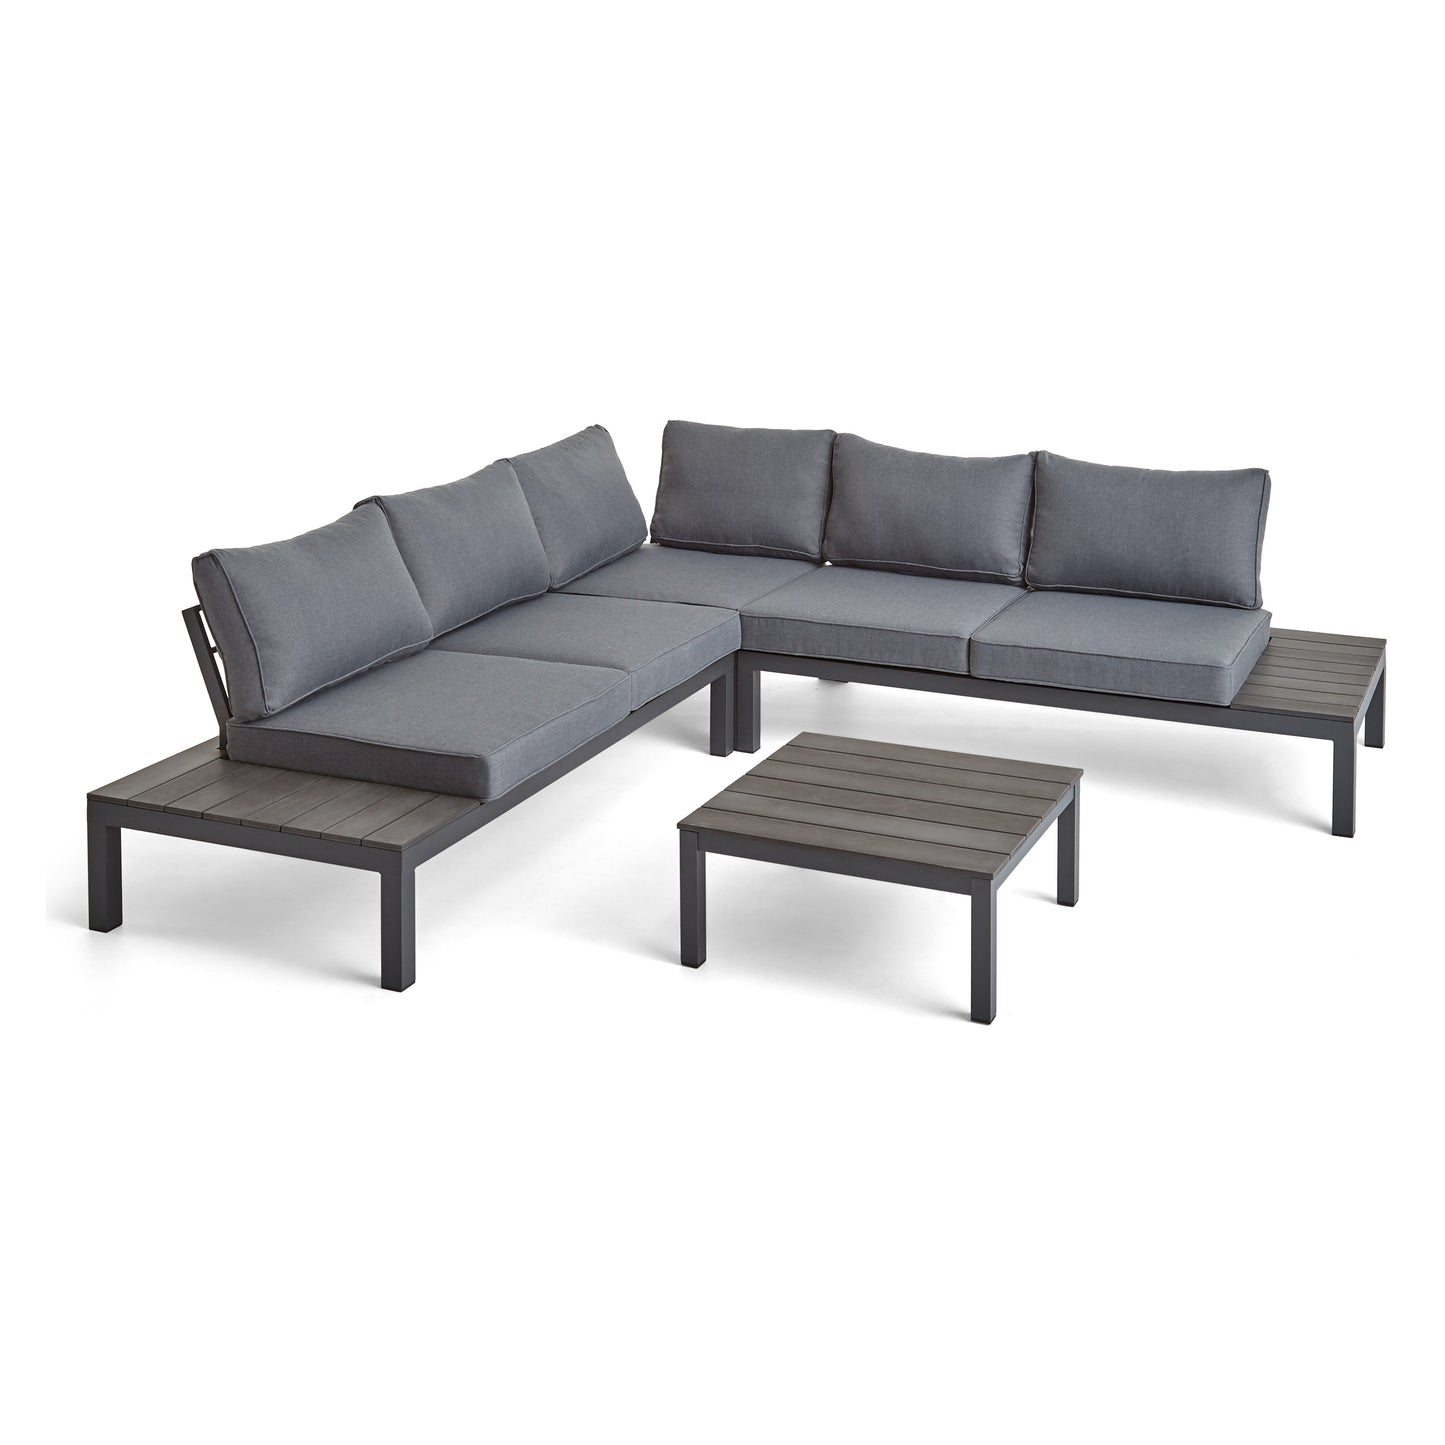 Blessen Outdoor Aluminum and Wood V-Shaped Sofa Set with Cushions